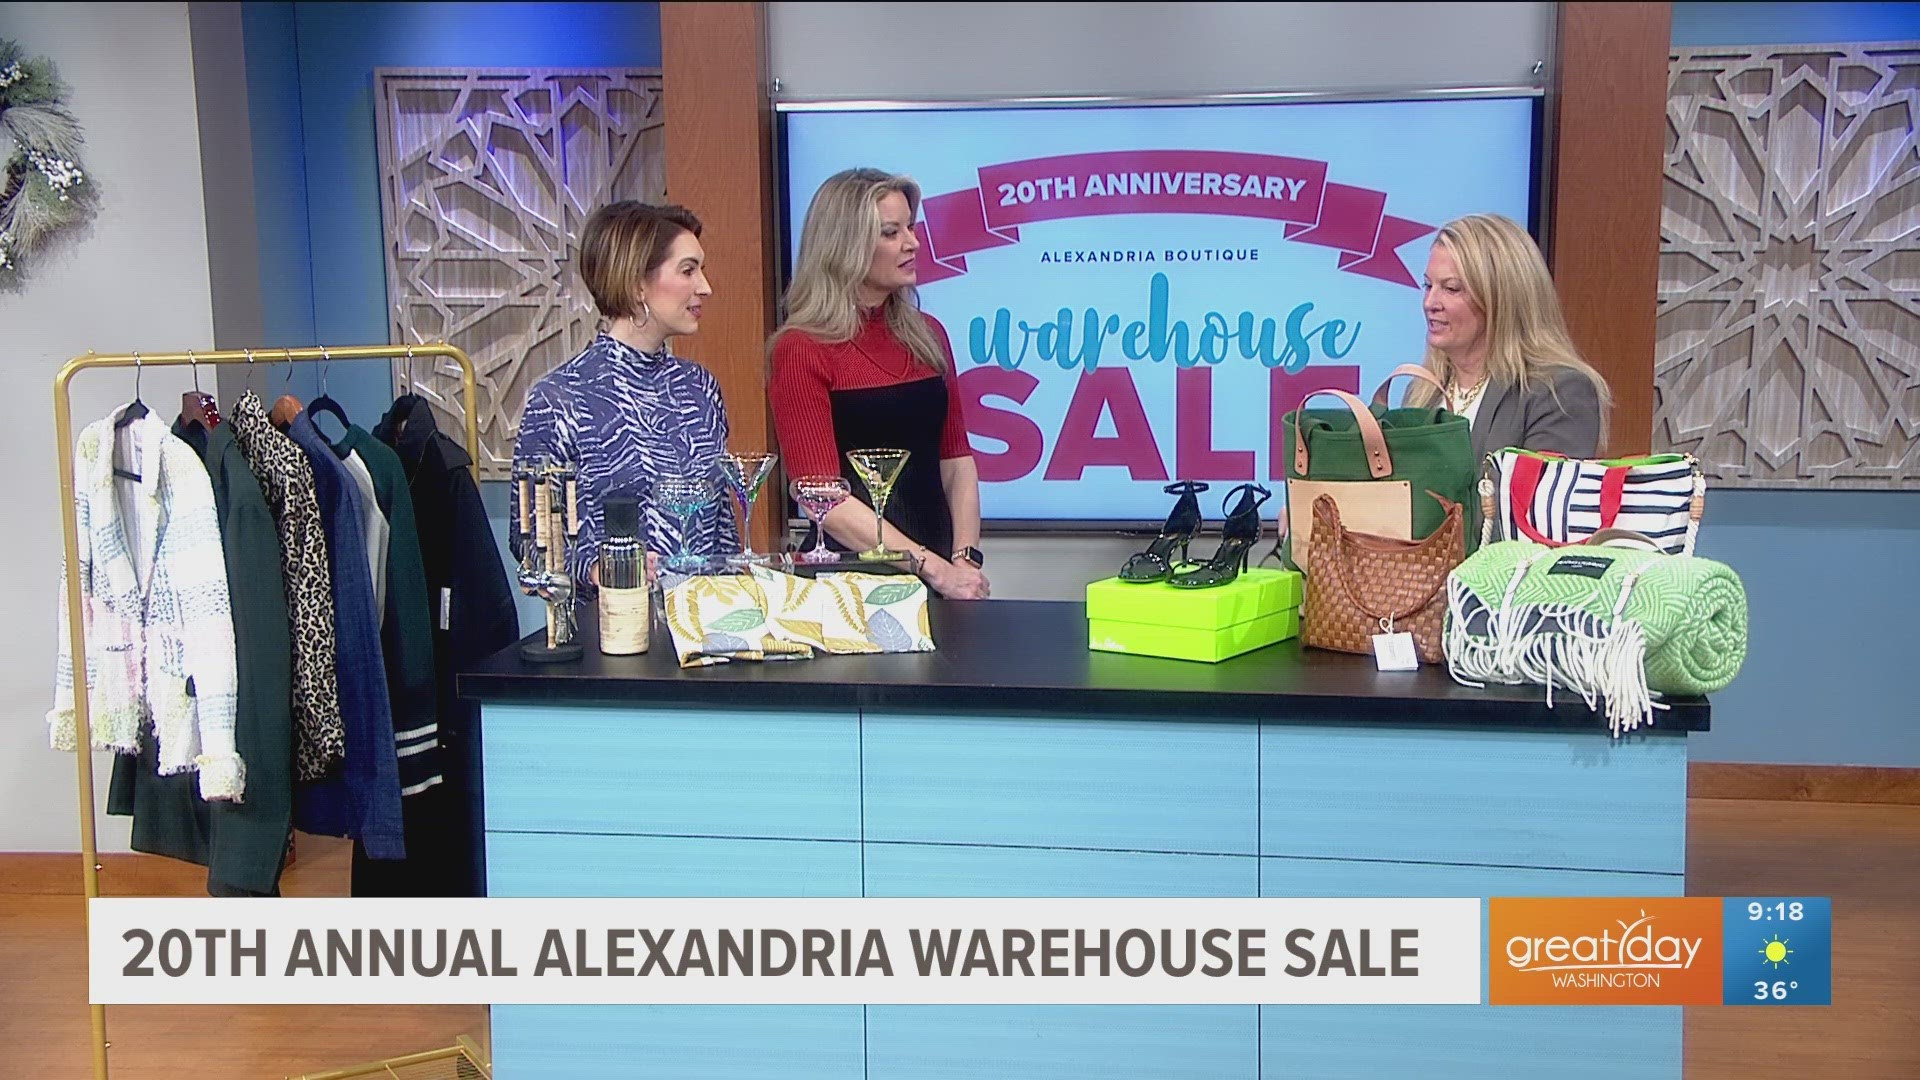 The longest-running winter warehouse sale returns for its Elizabeth Todd shares a preview of the 20th annual Alexandria Warehouse Sale happening 2/3 and 2/4.